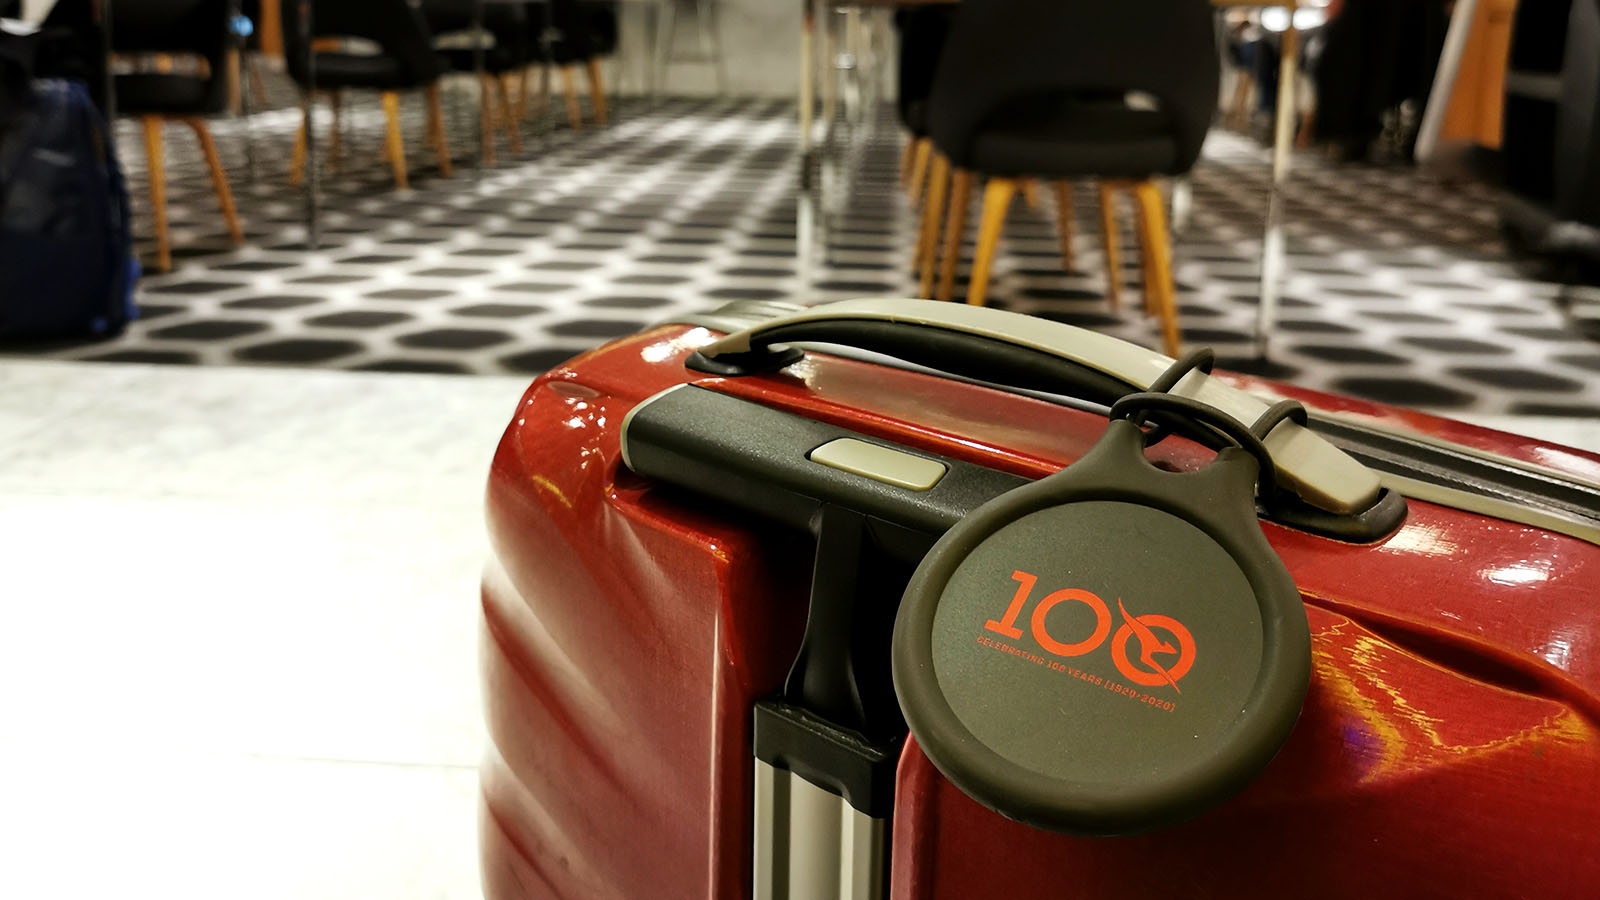 Platinum baggage tag in the Qantas Los Angeles First Lounge - Point Hacks, by Chris Chamberlin